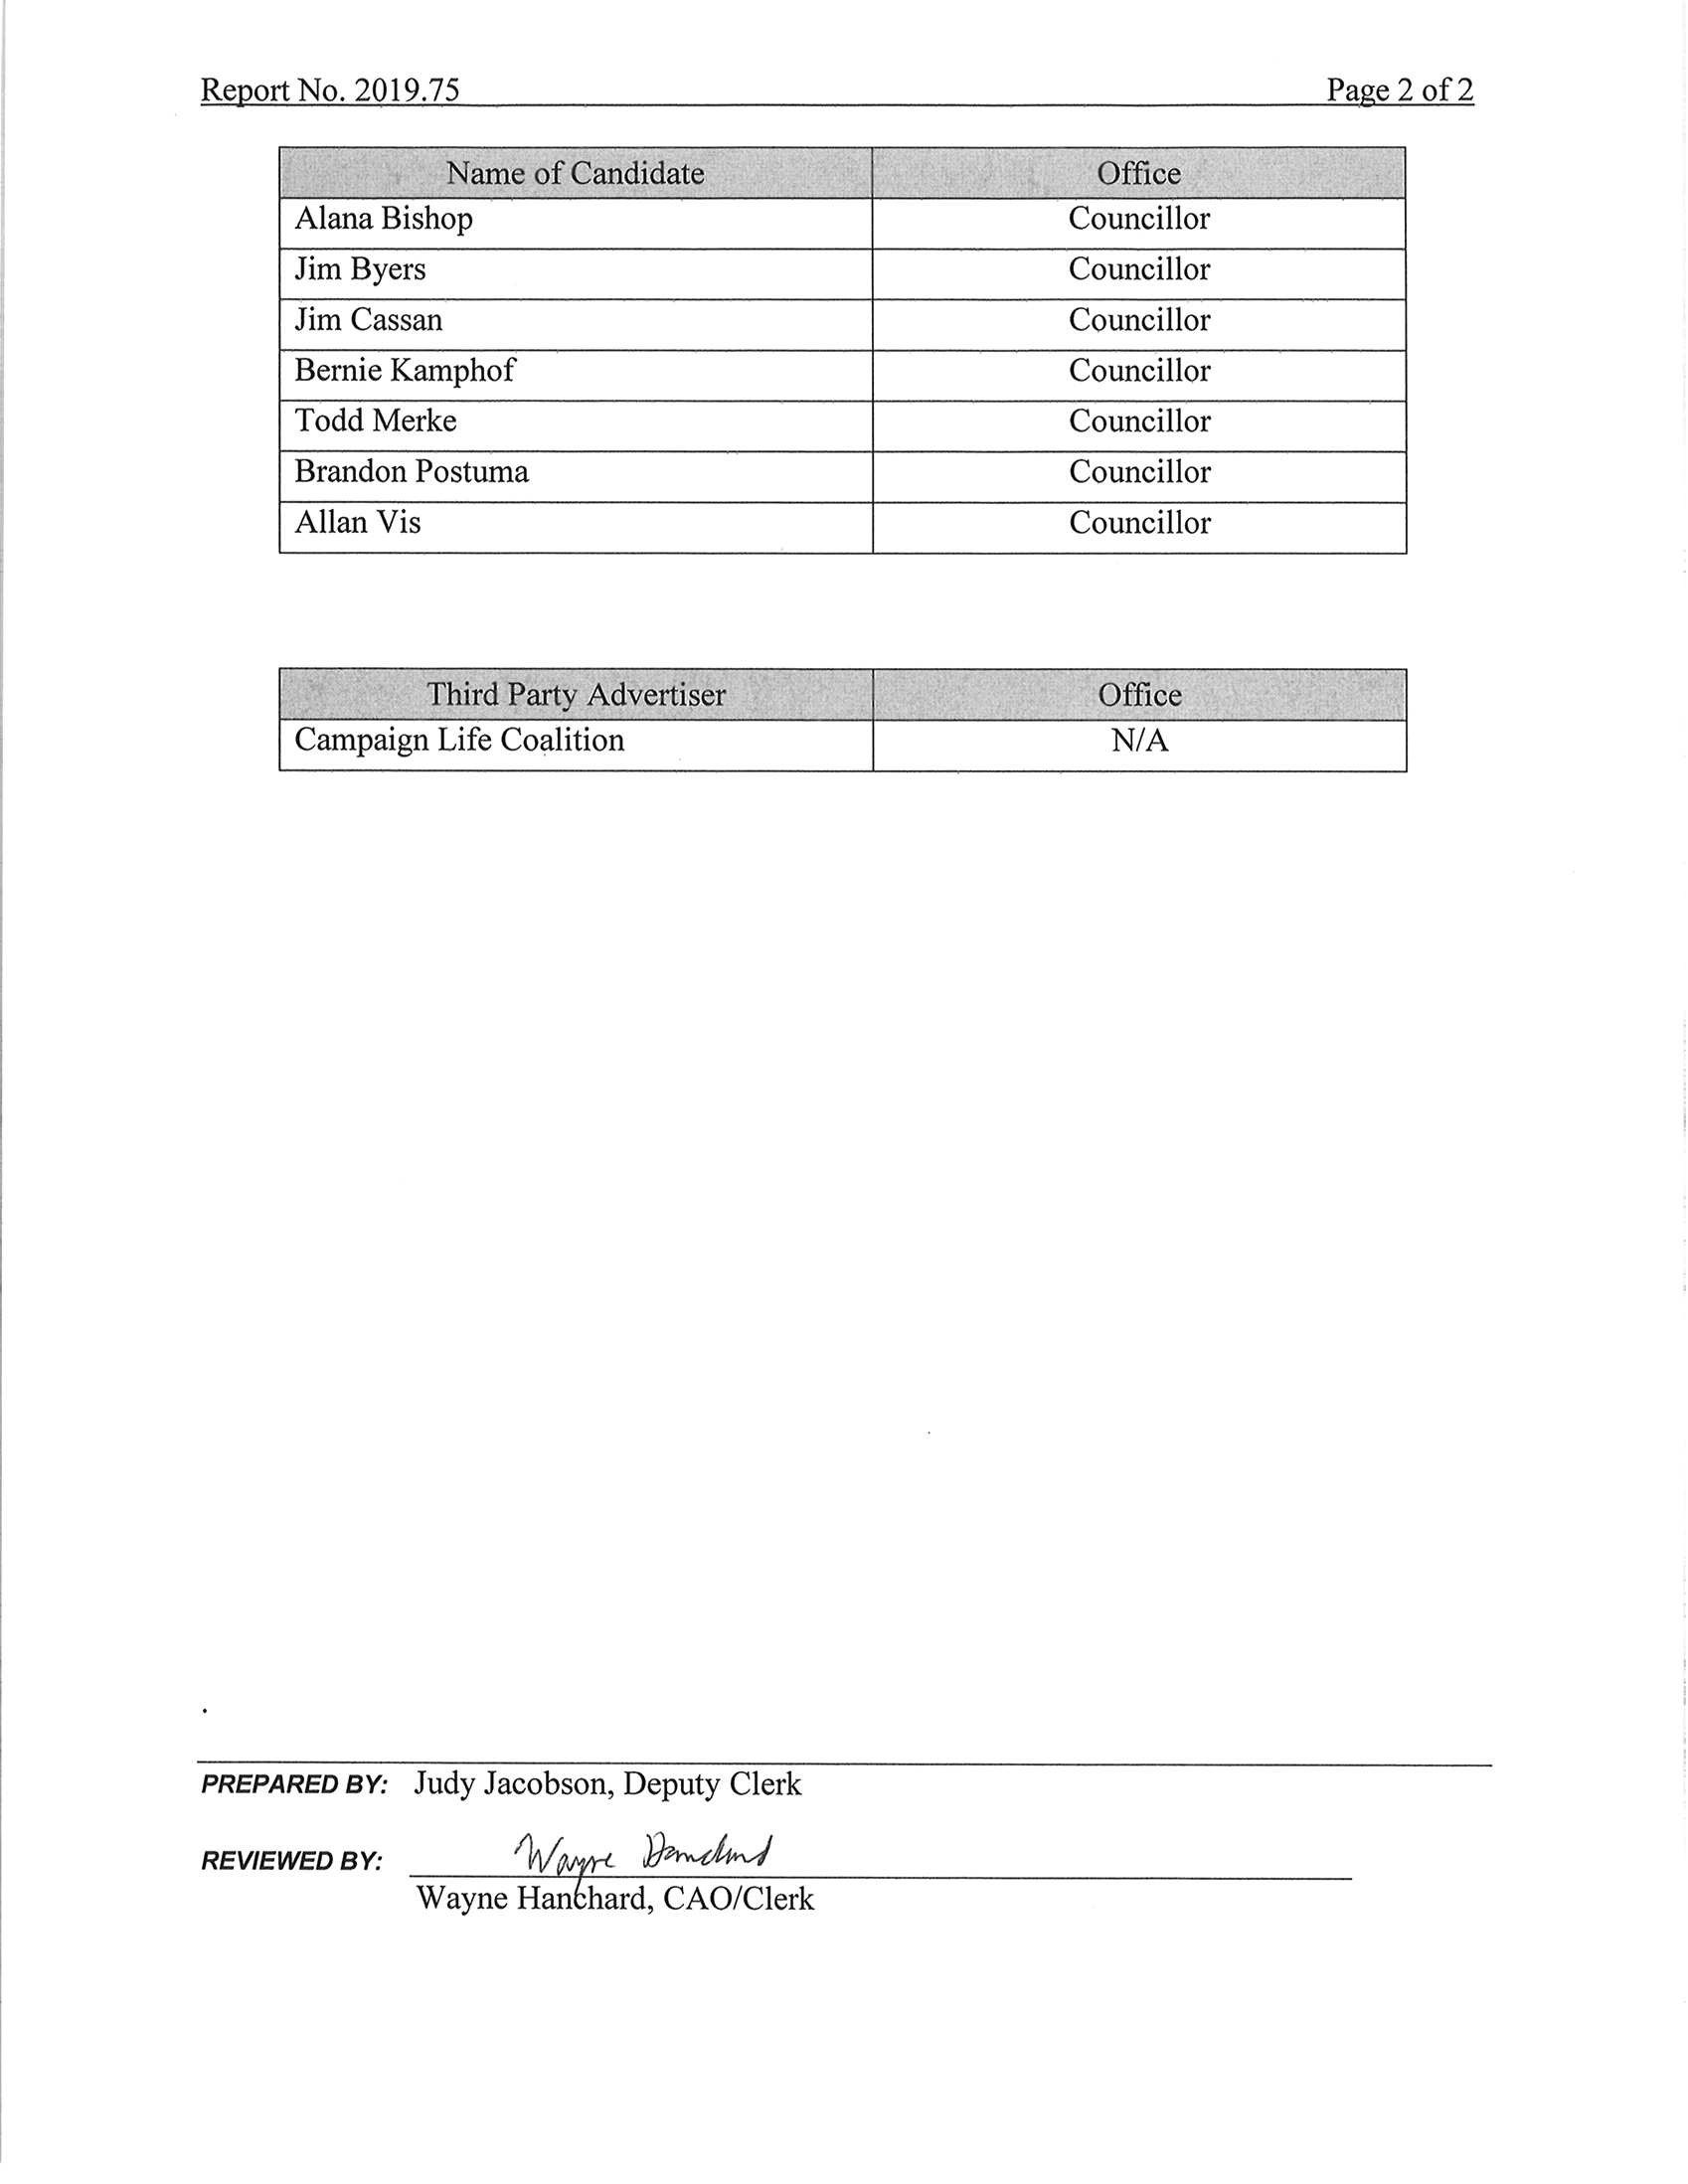 Report 2019.75 - Municipal Election 2018 - Candidates Financial Statements_Page_2.jpg